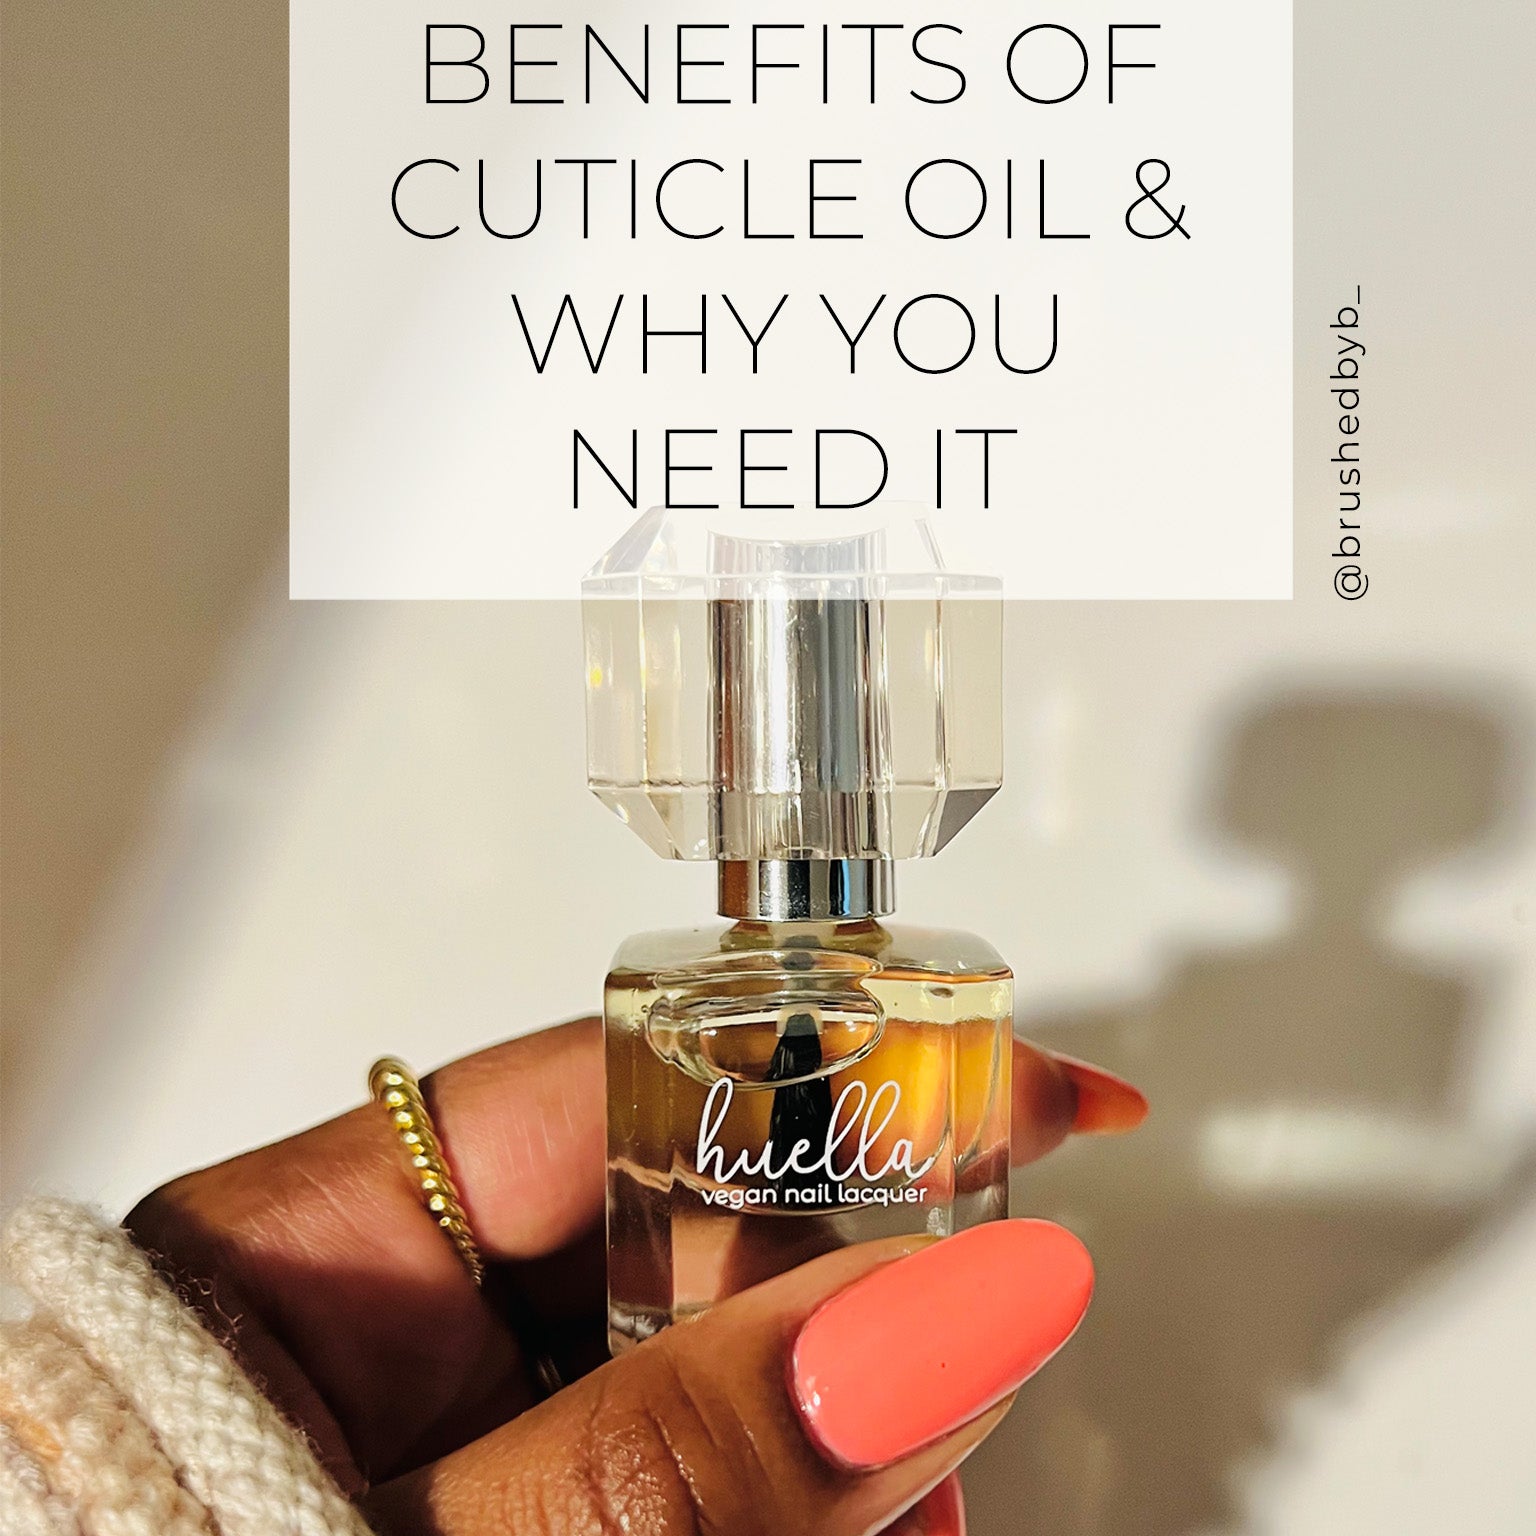 Benefits Of Cuticle Oil & Why You Need It